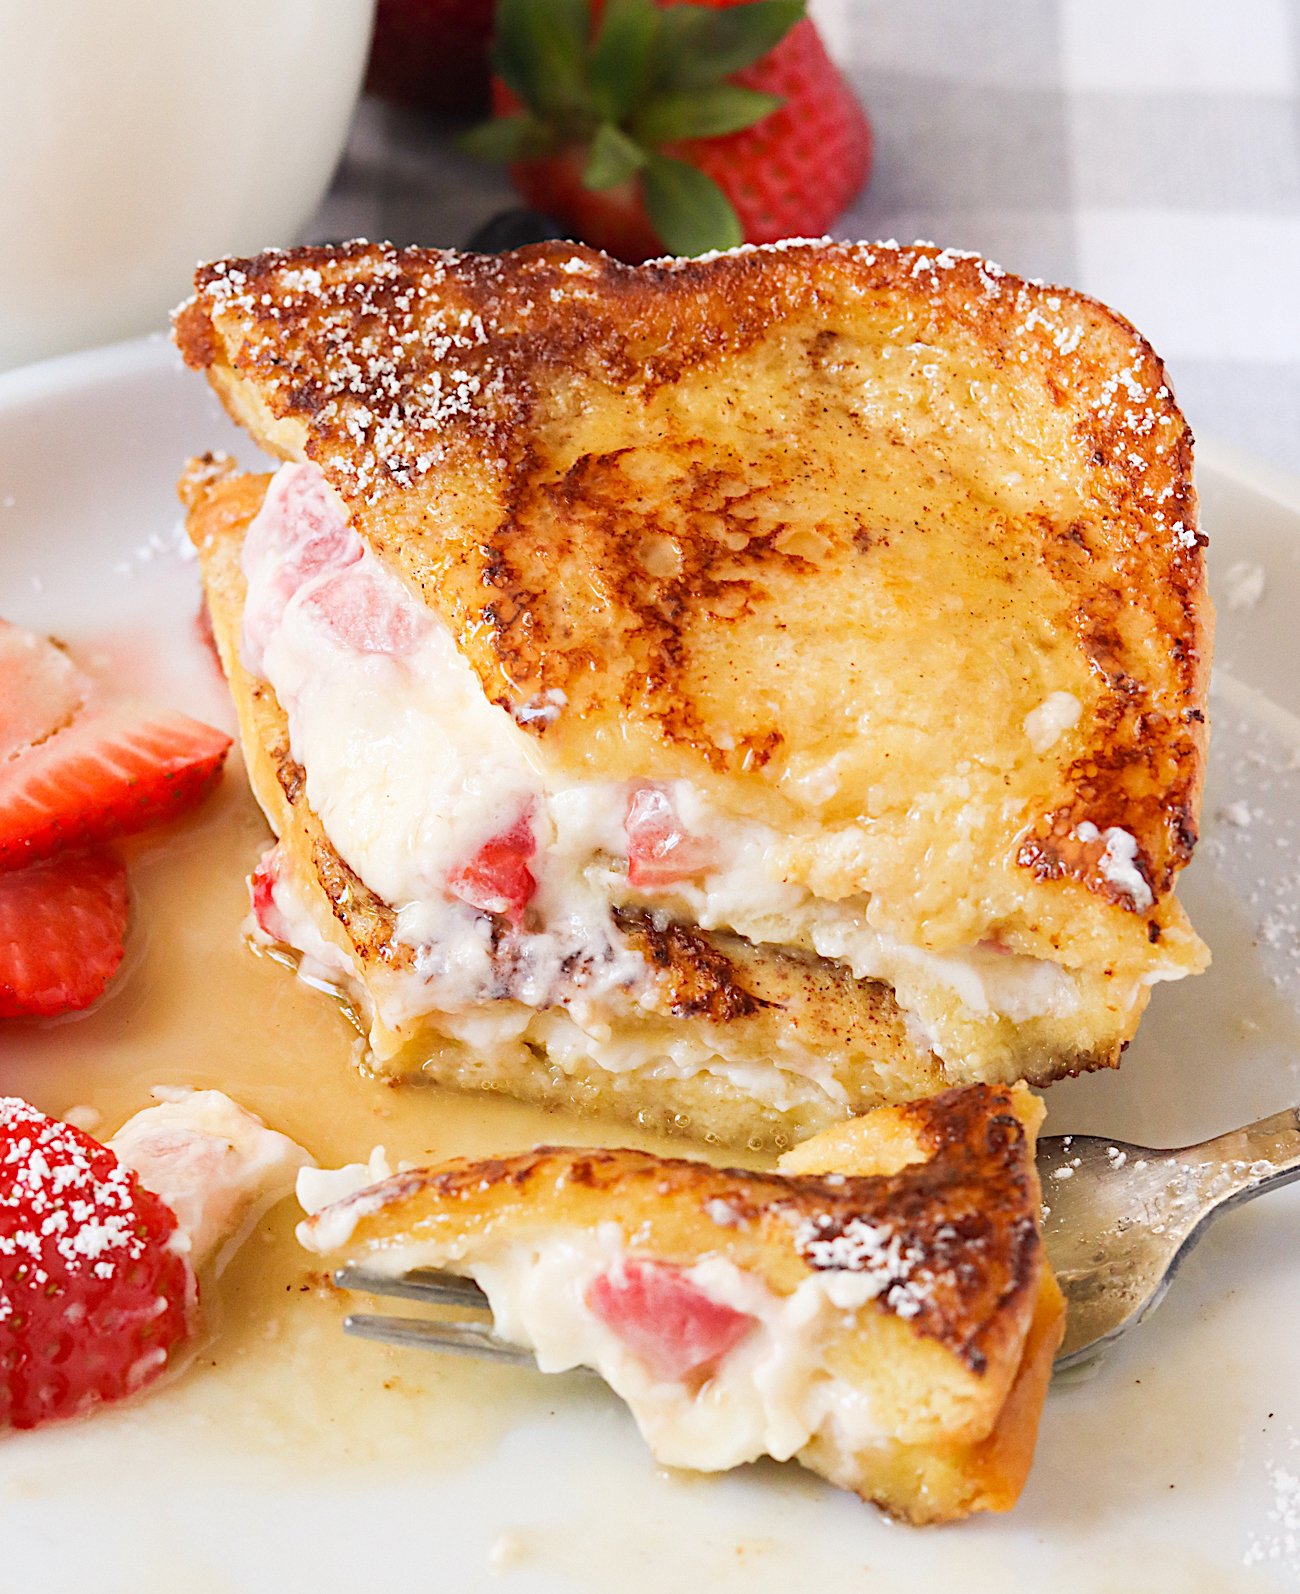 Biting into insanely delicious stuffed French toast